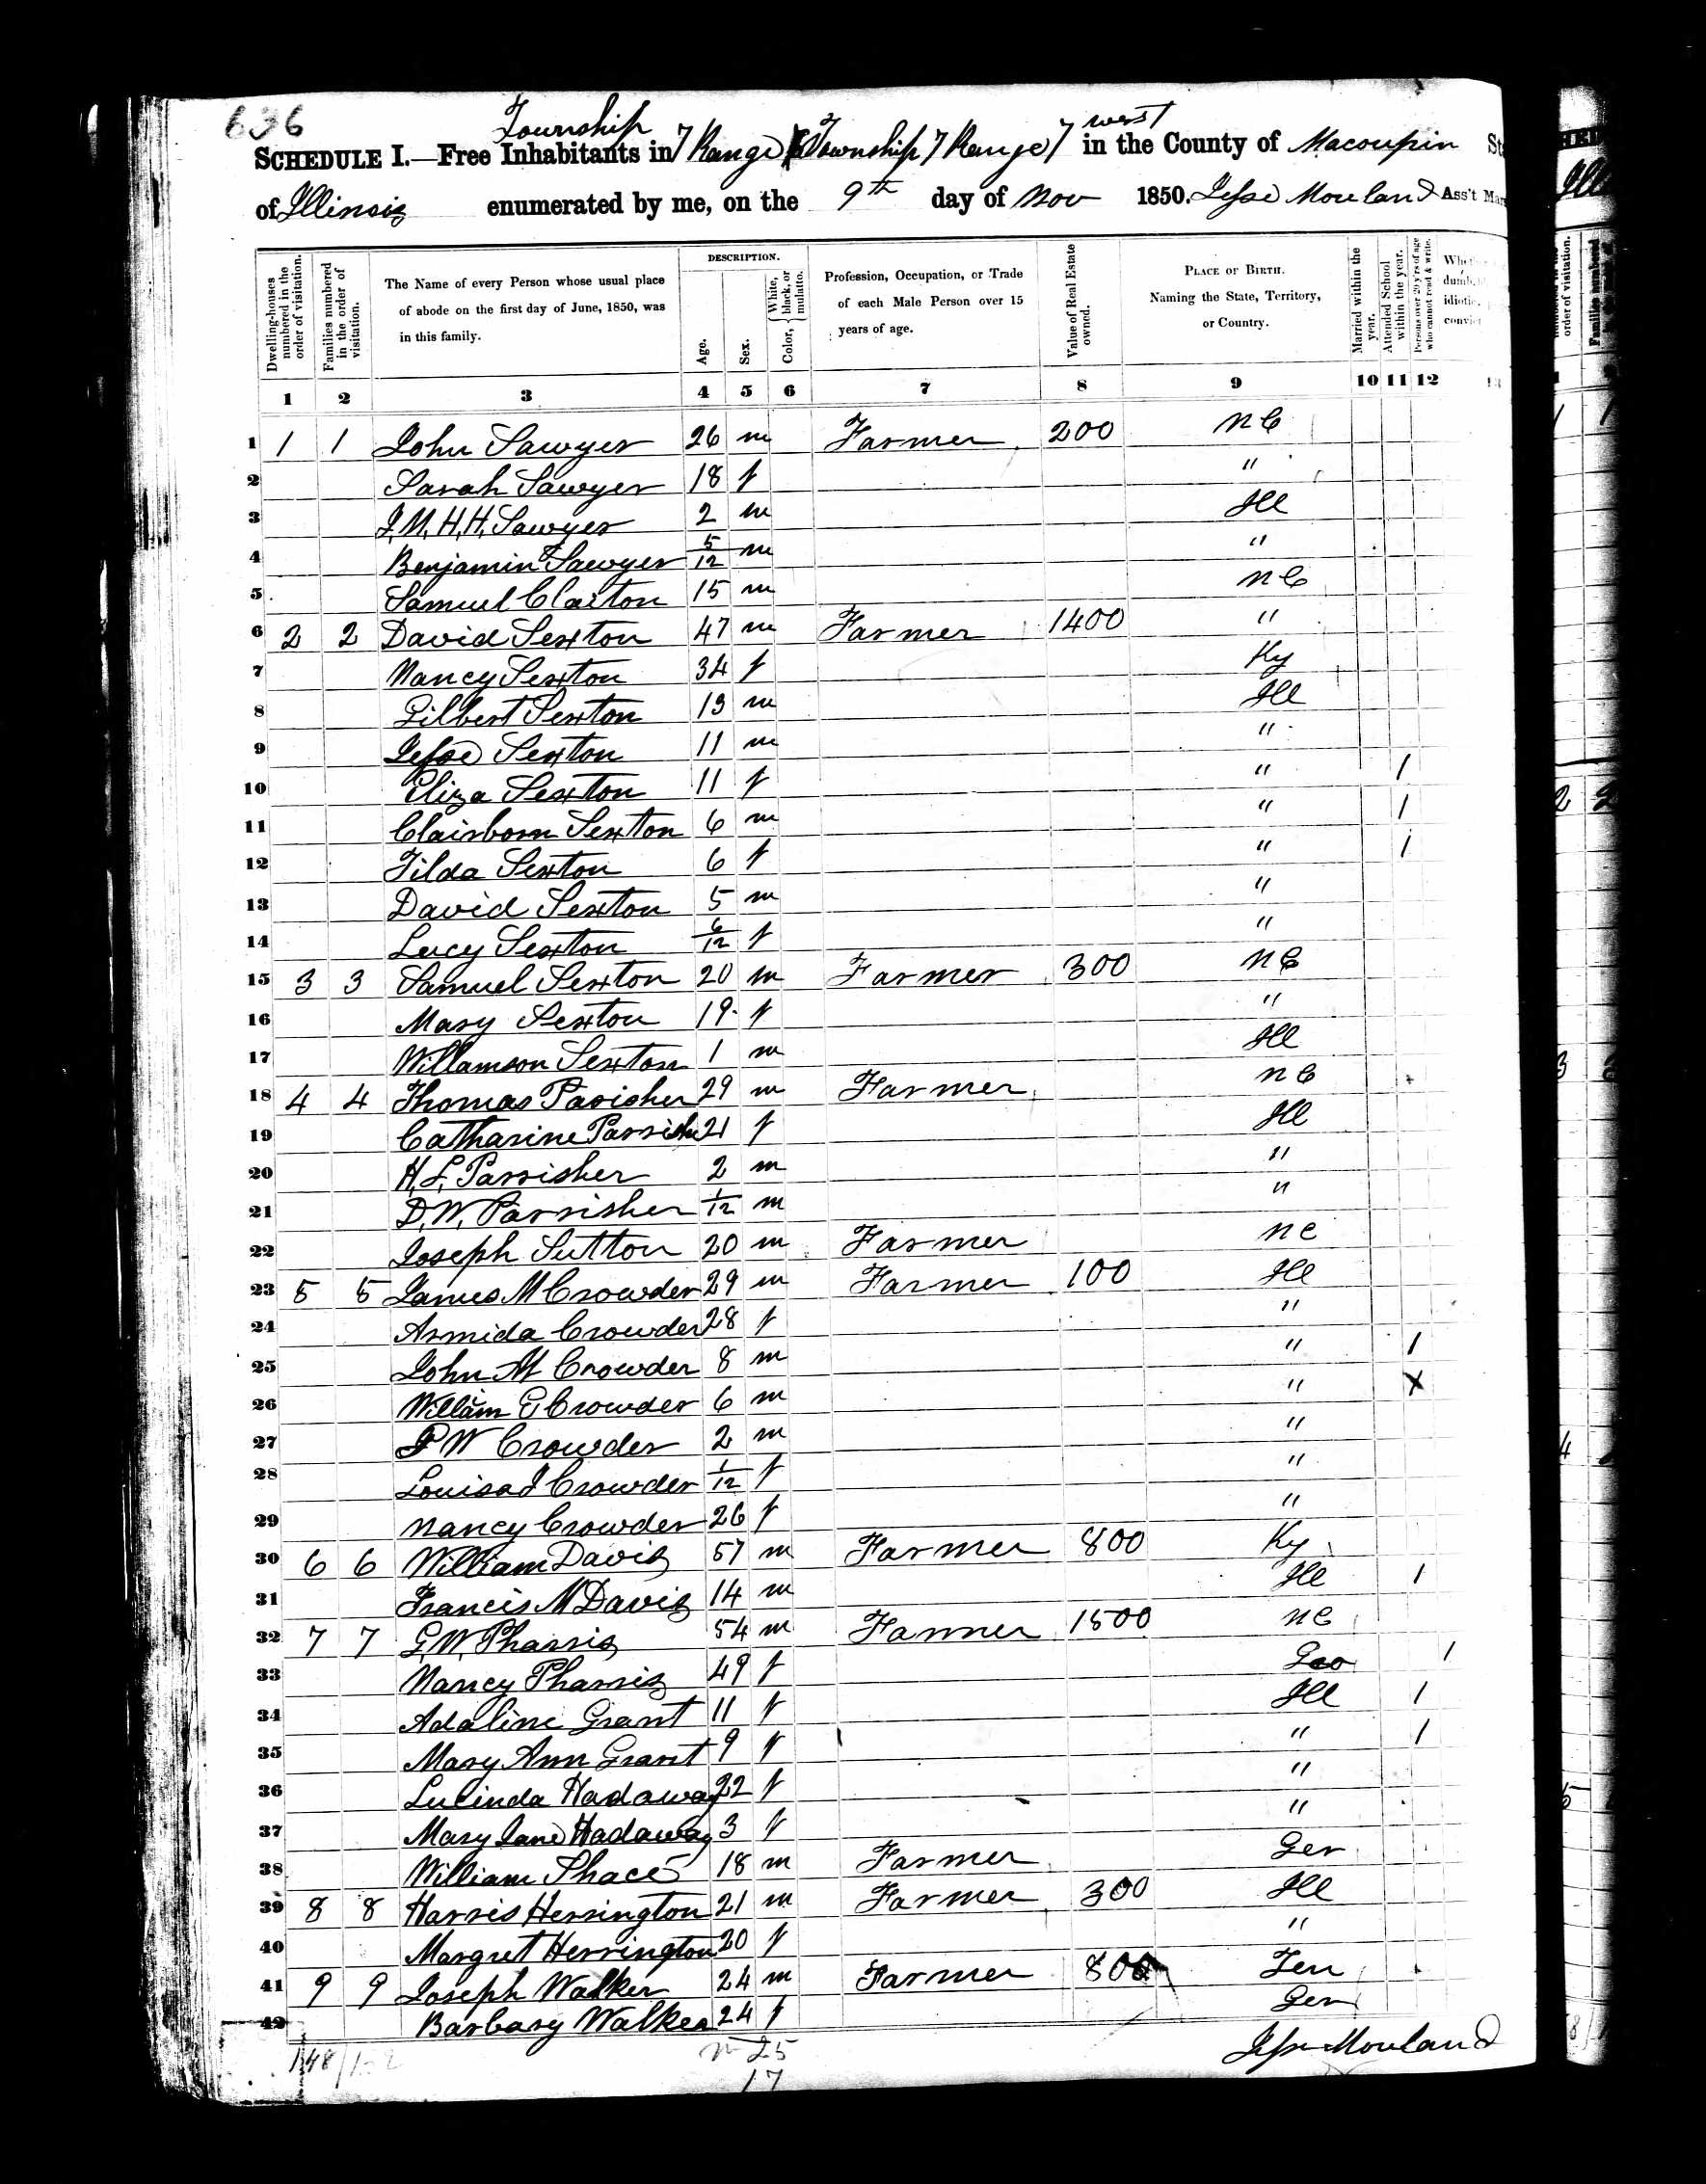 Joseph Walker (likely son of Jacob and Agnes), 1850 Macoupin County, Illinois, census.